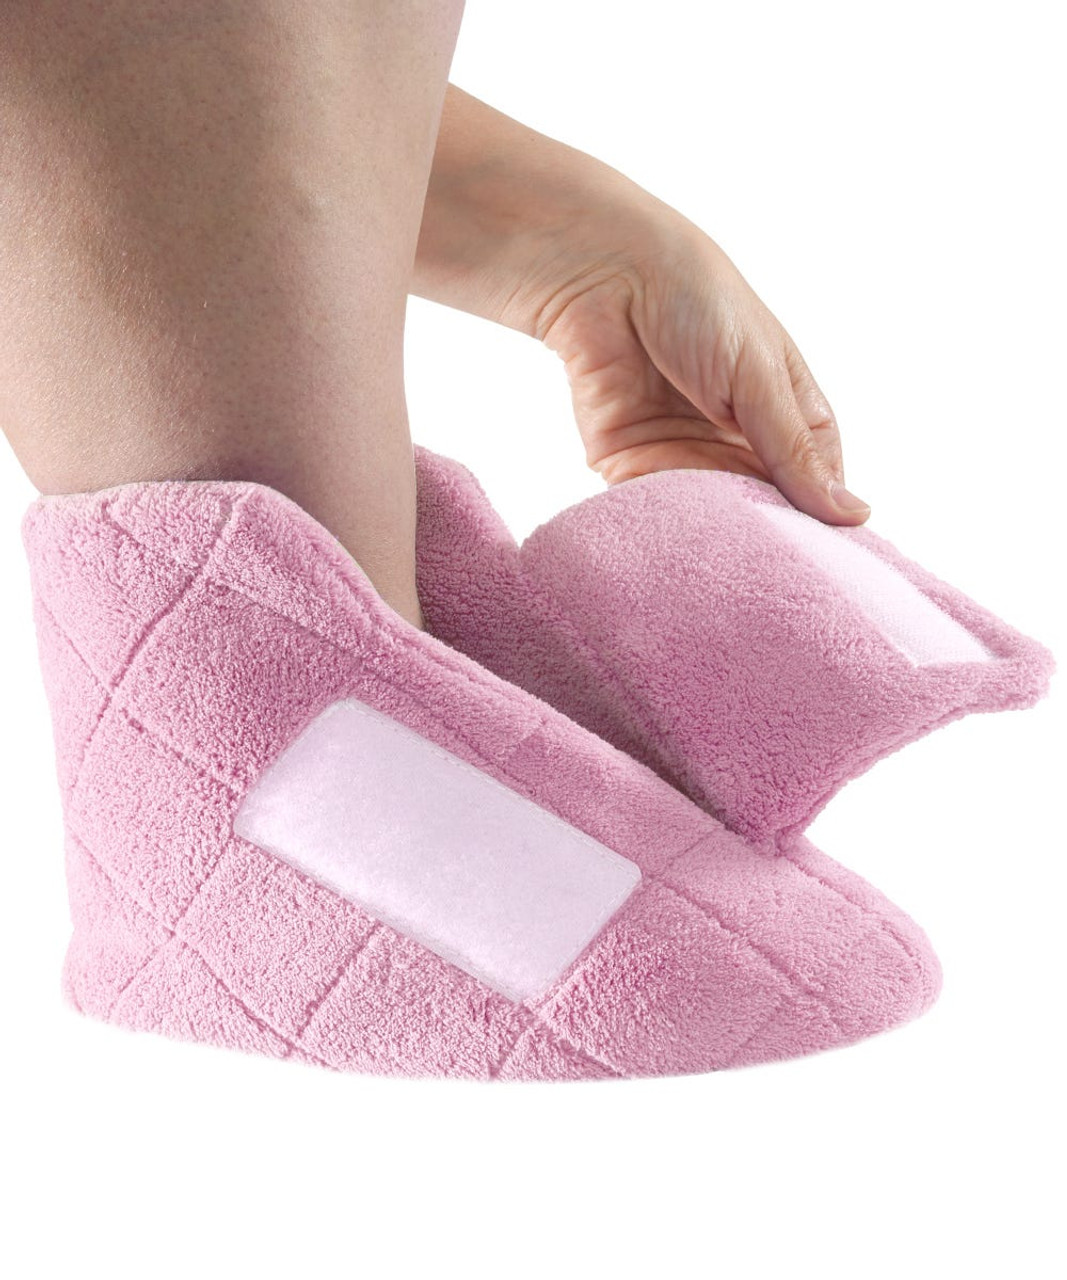 Silverts SV10390 Womens Extra Wide Swollen Feet Slippers Baby Pink, Size=M, SV10390-SV721-M